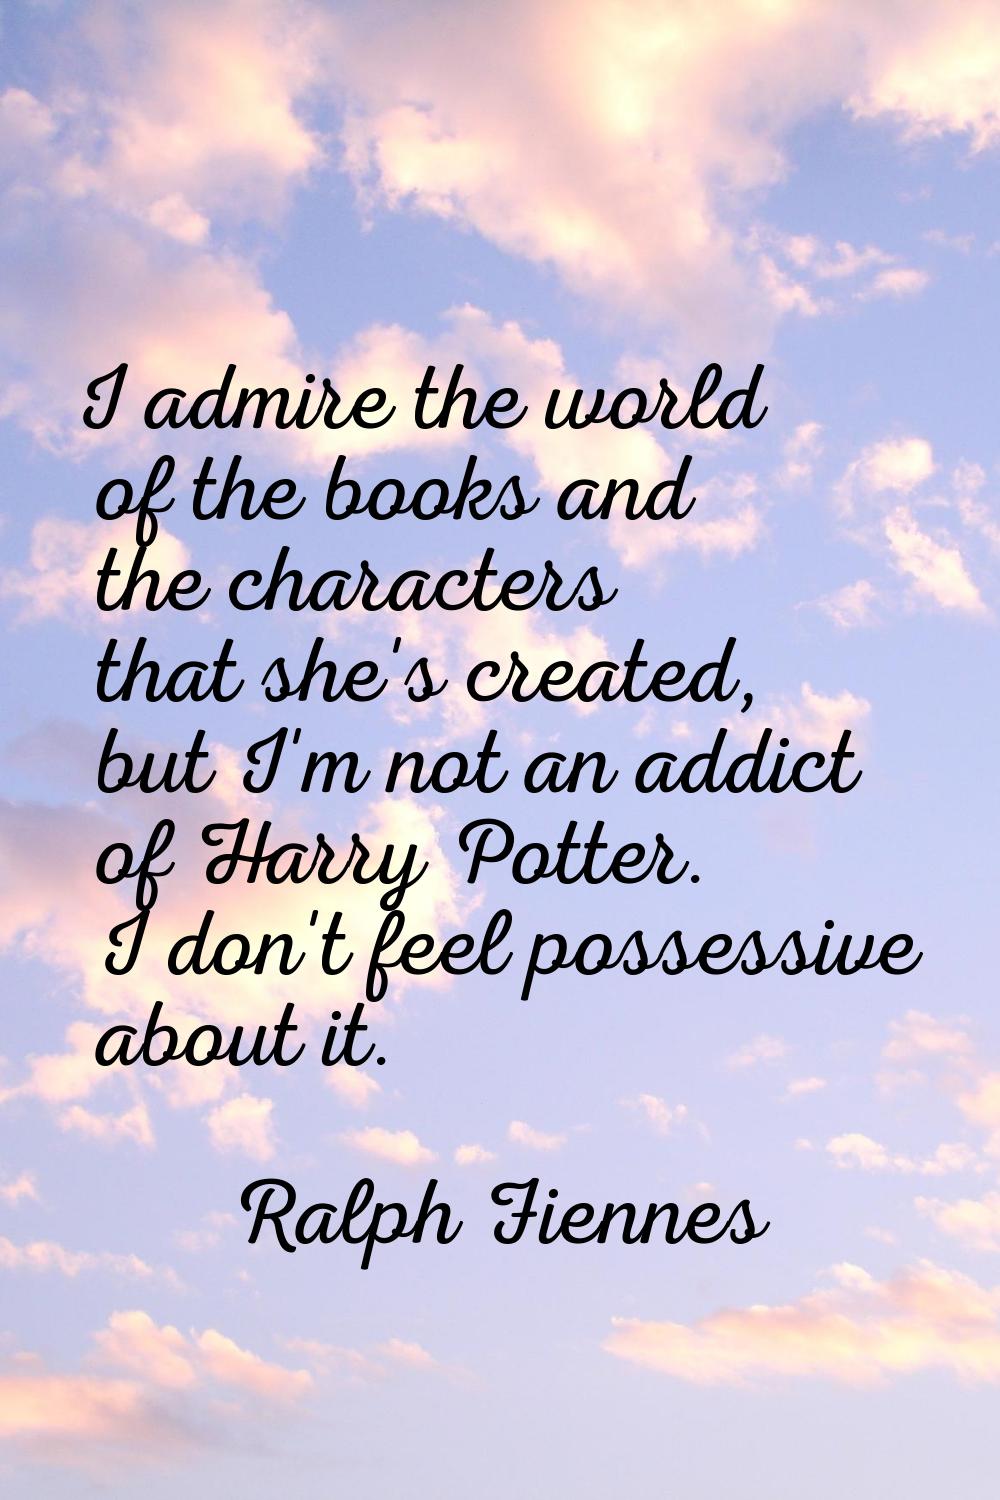 I admire the world of the books and the characters that she's created, but I'm not an addict of Har